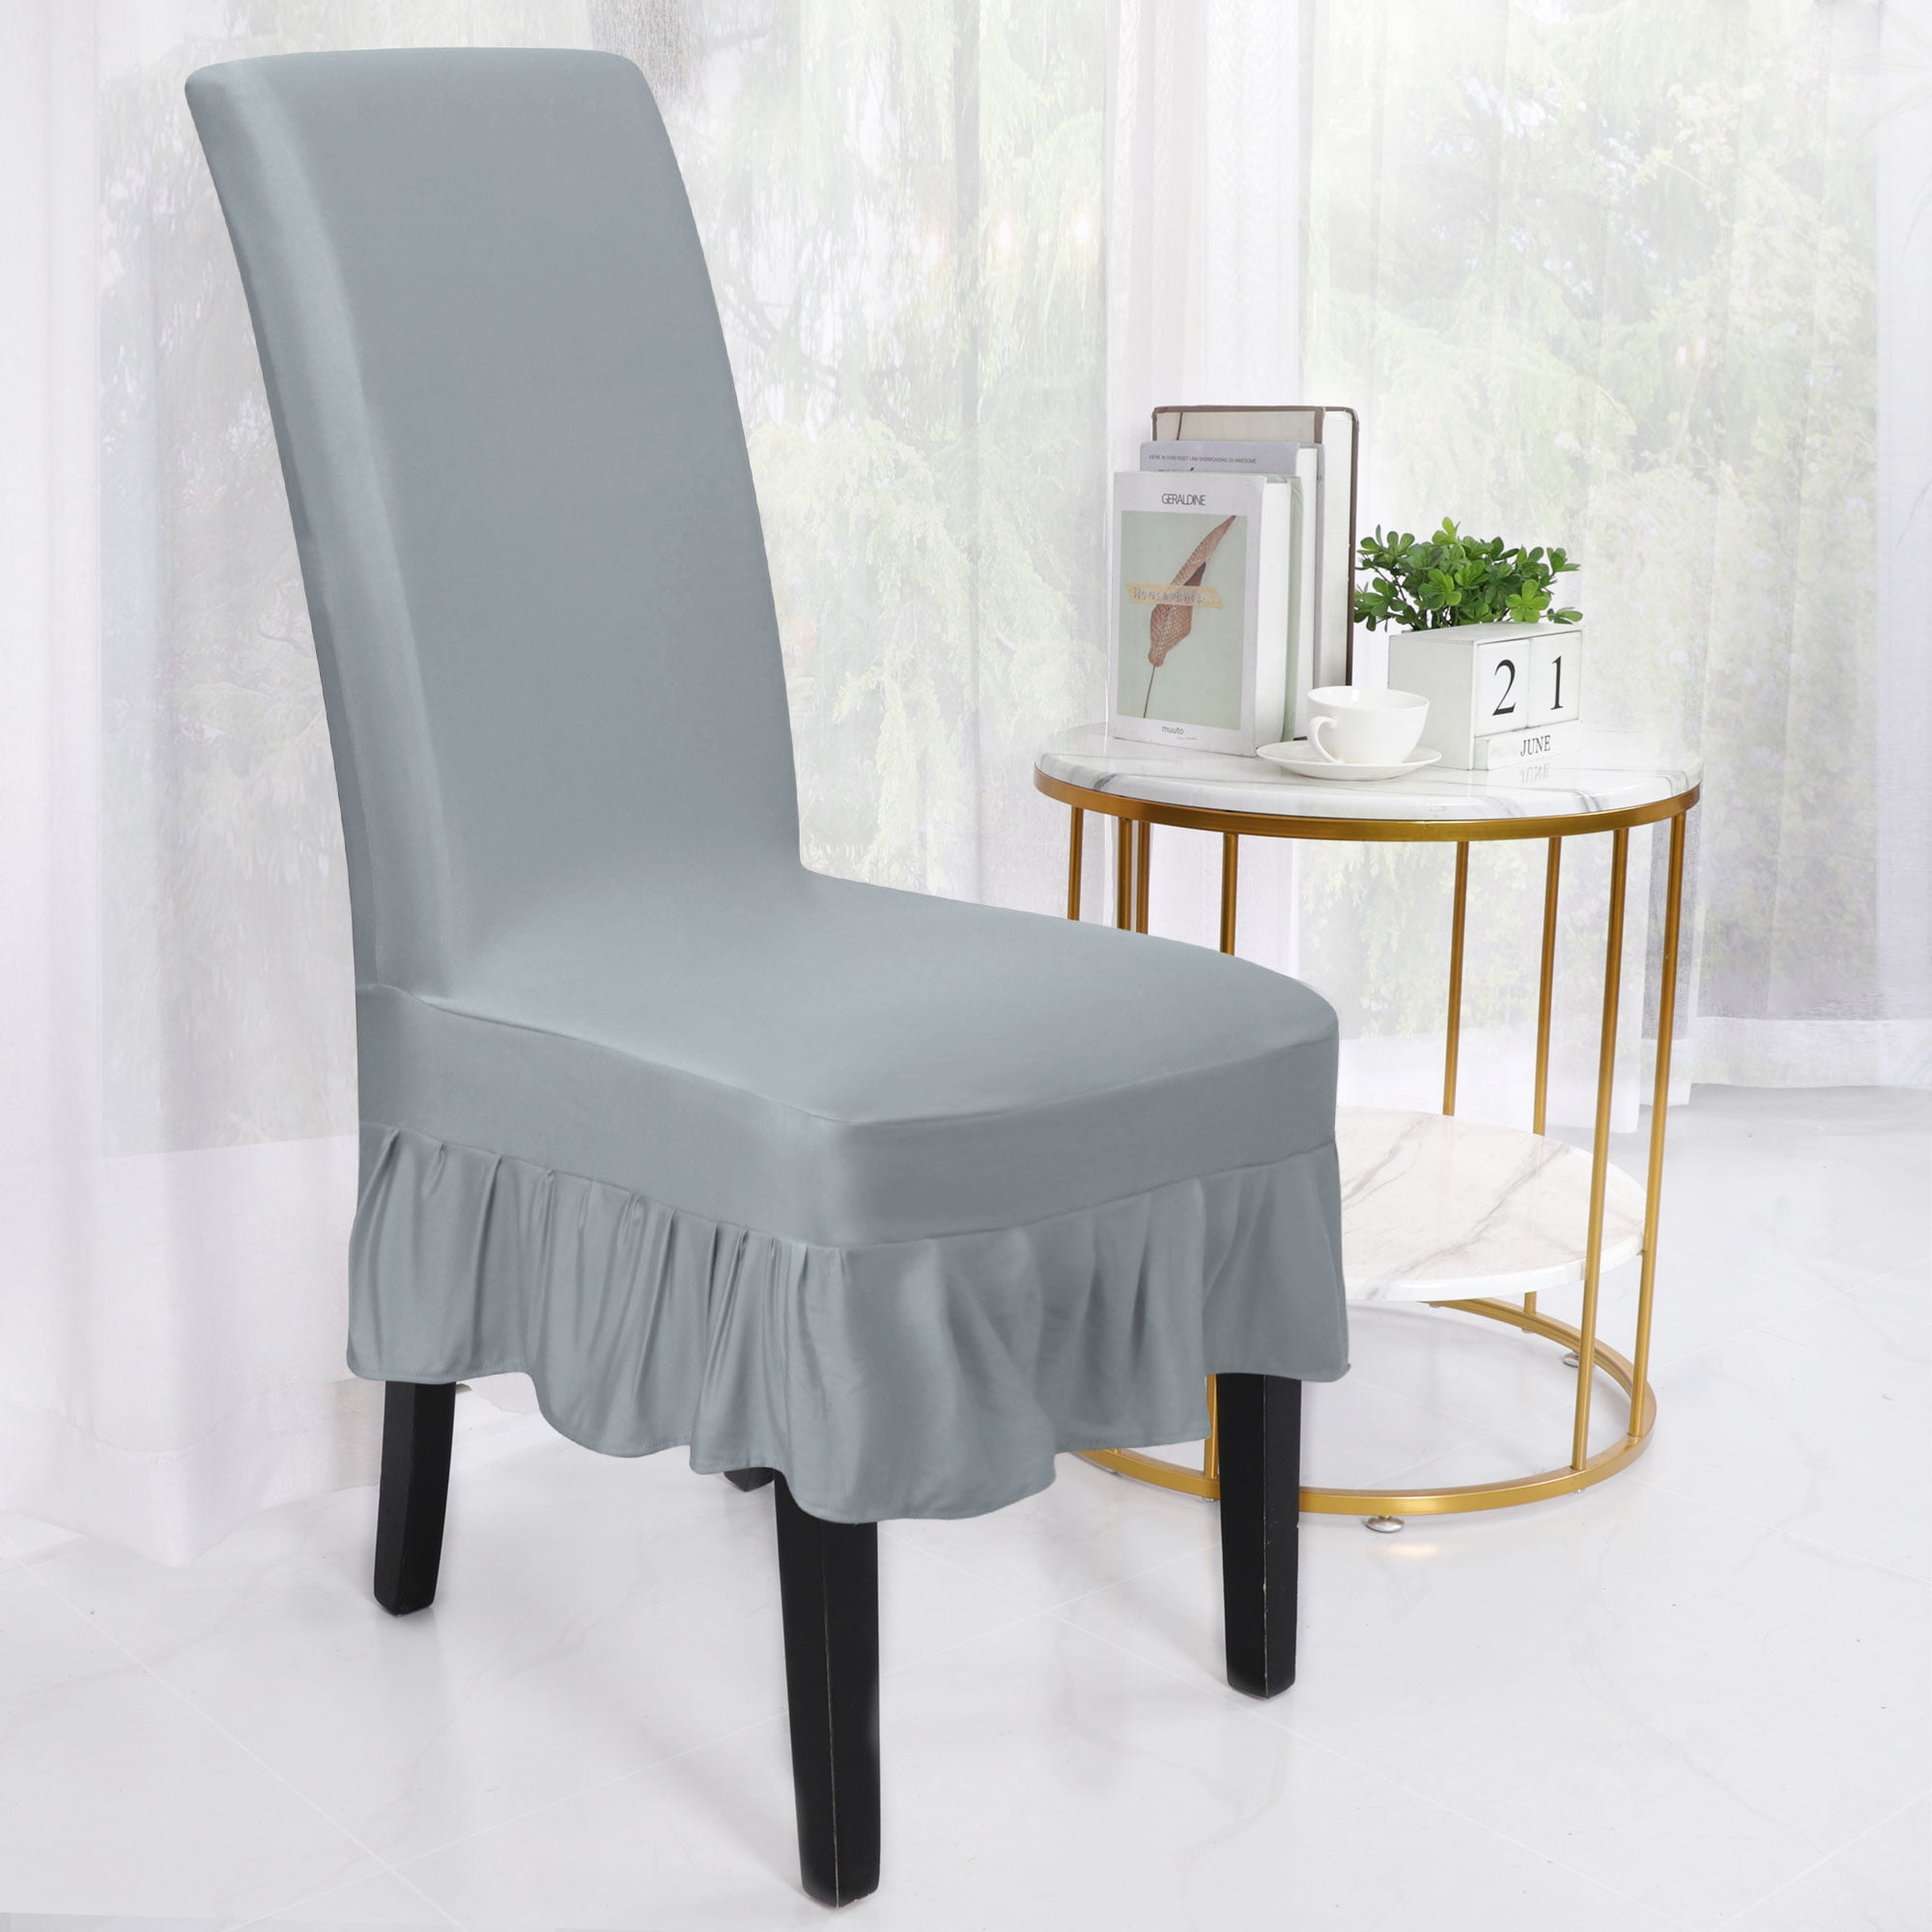 Pleated Skirt Stretch Chair Cover Hotel Wedding Dining Room Detachable Slipcover 